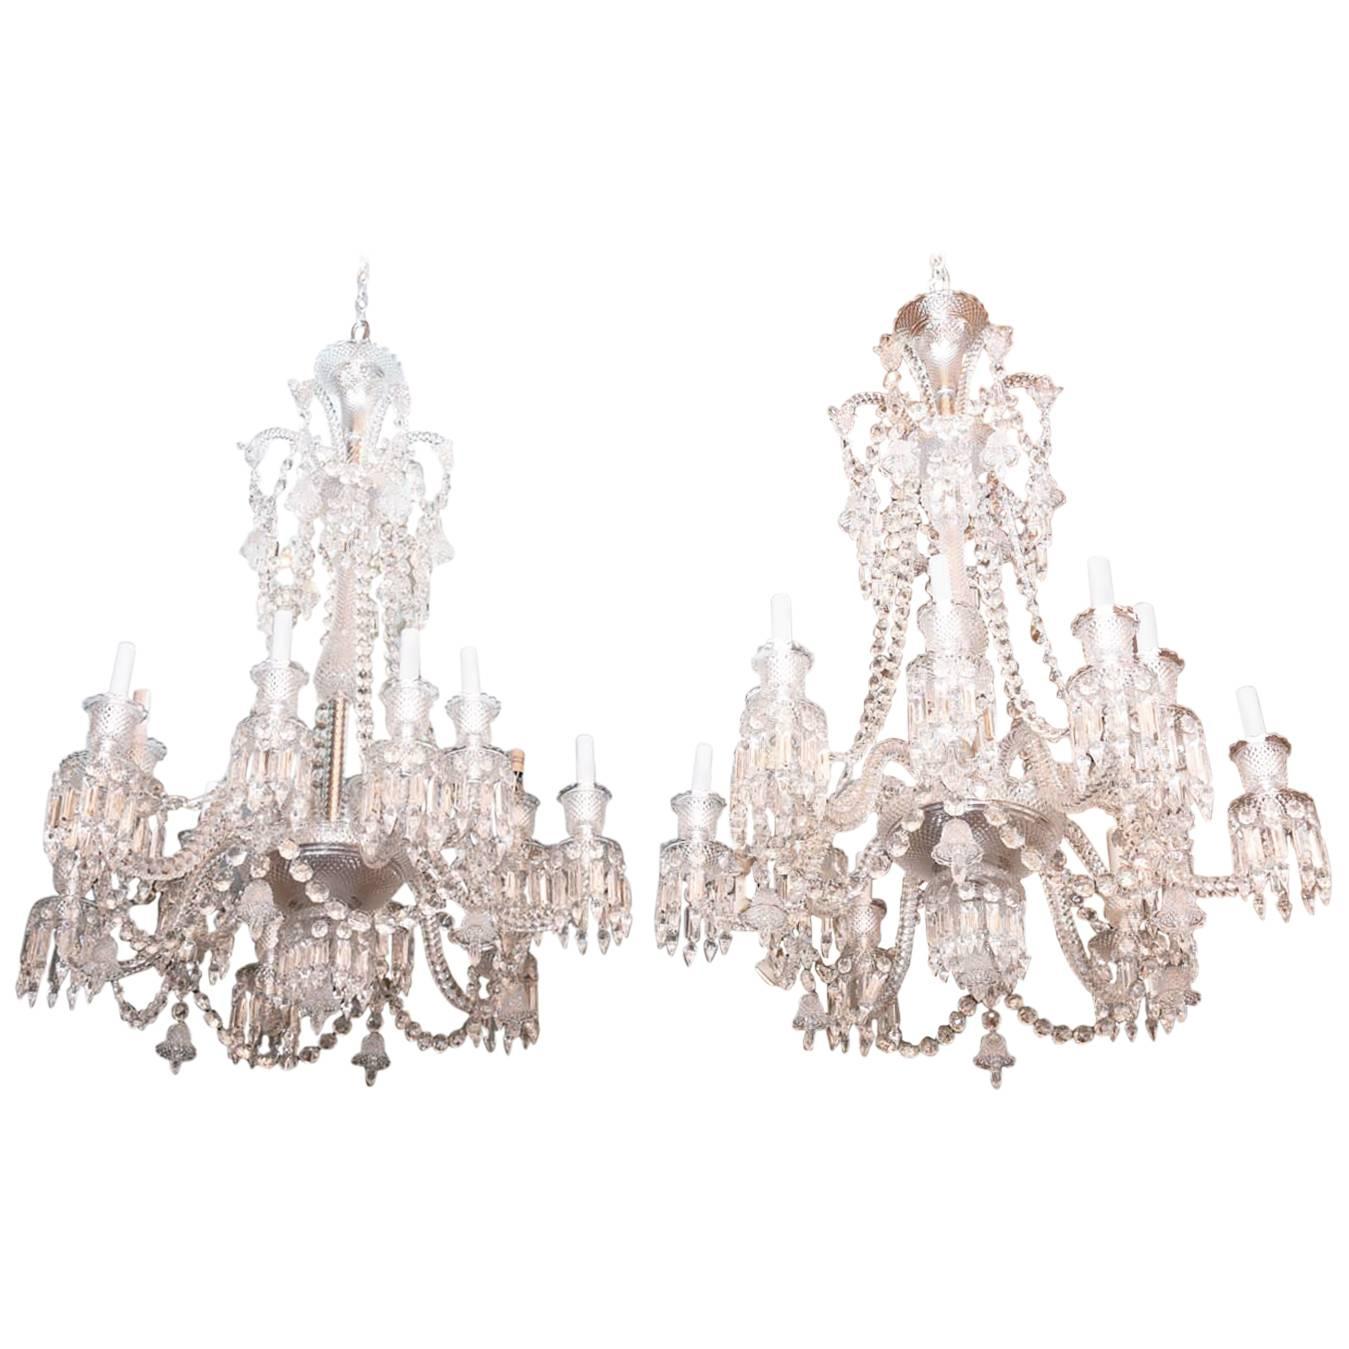 Pair of Baccarat Glass Twelve-Arm Chandeliers, Signed Baccarat